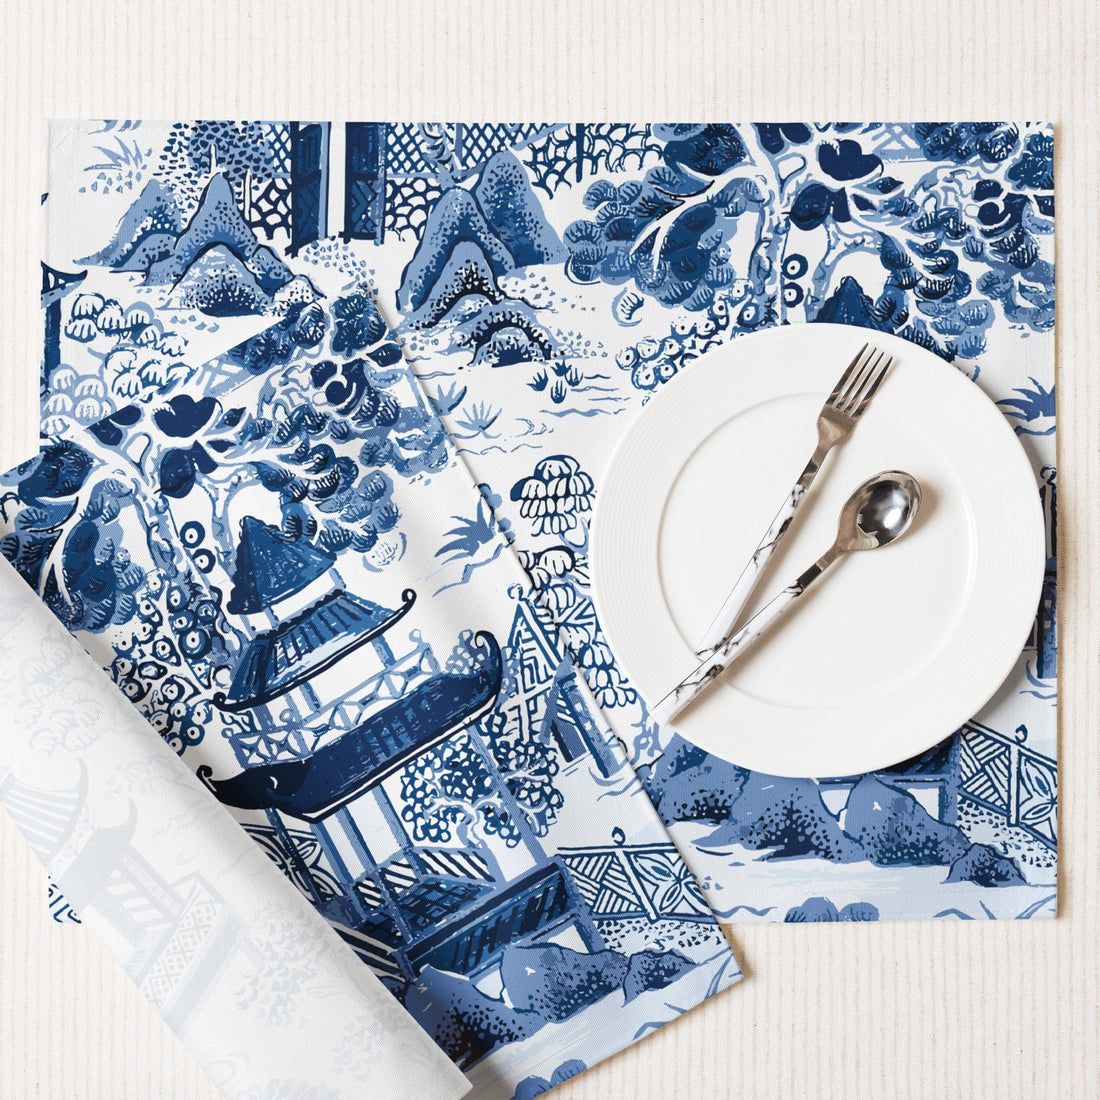 Kate McEnroe New York Chinoiserie Blue and White Placemats Set of 4, Traditional Asian Pagodas and Cherry Blossoms Porcelain Design Table MatsPlacemats8697237_17484